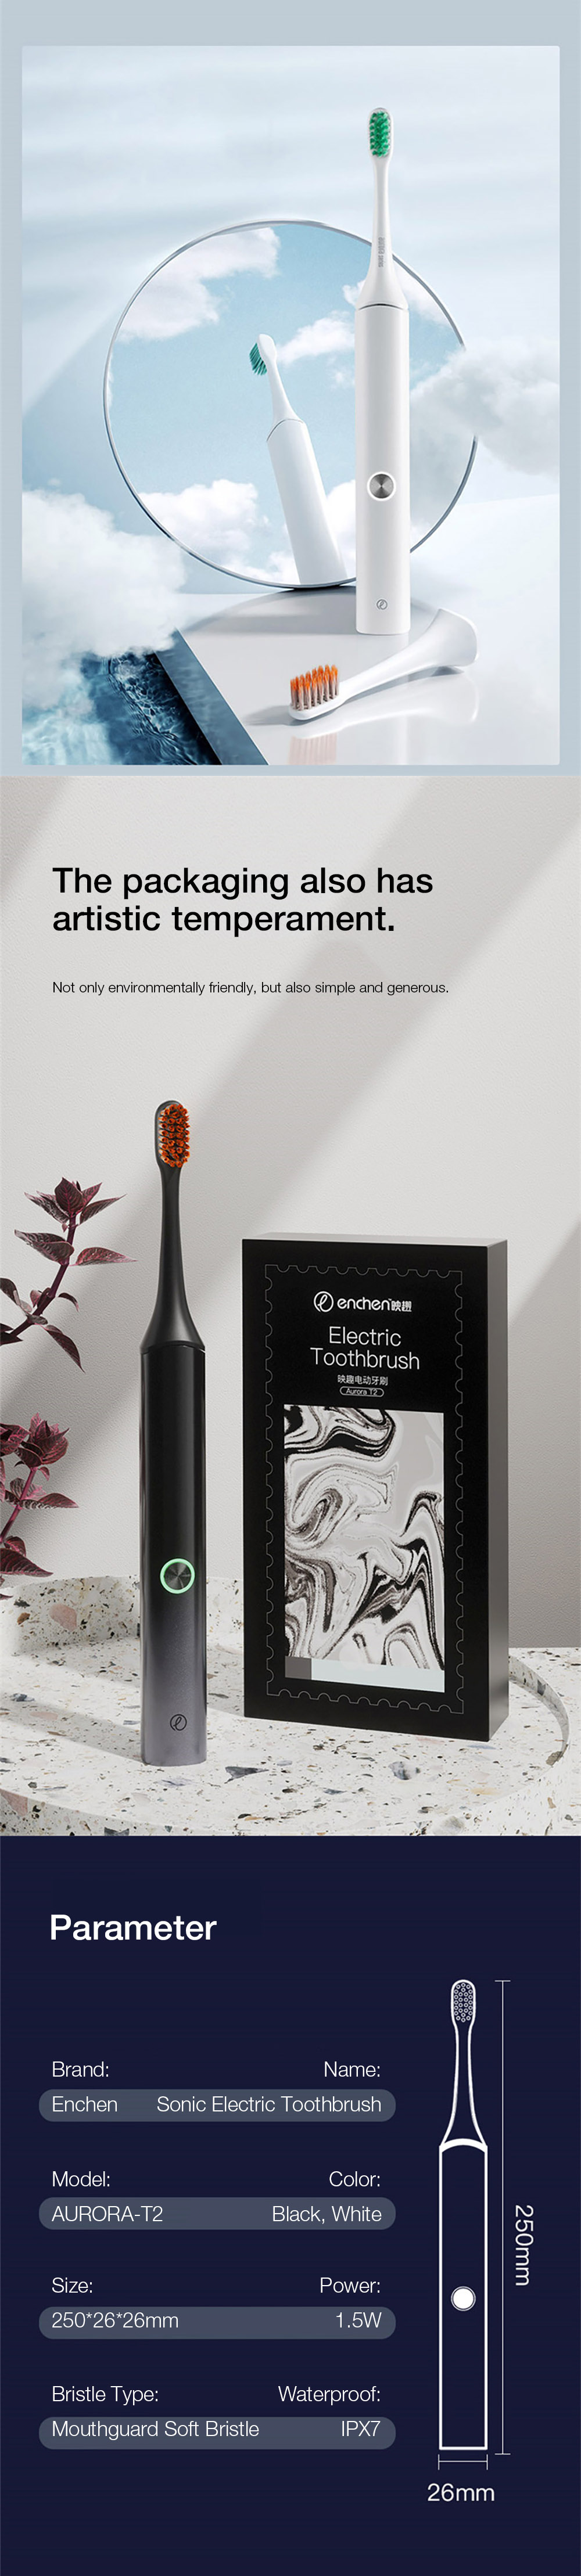 Enchen-AURORA-T2-Sonic-Electric-Toothbrush-Magnetic-Levitation-Power-Smart-Remider-Electric-Toothbru-1948655-7